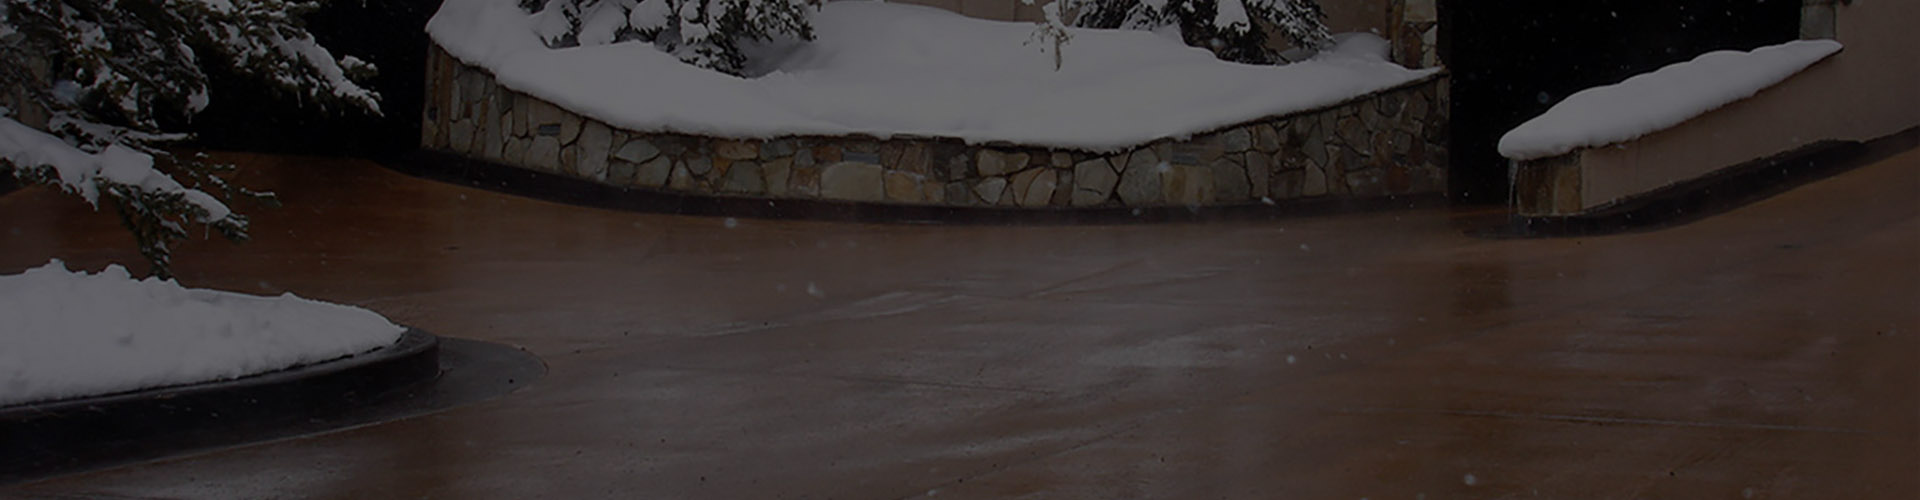 Radiant heated driveway systems